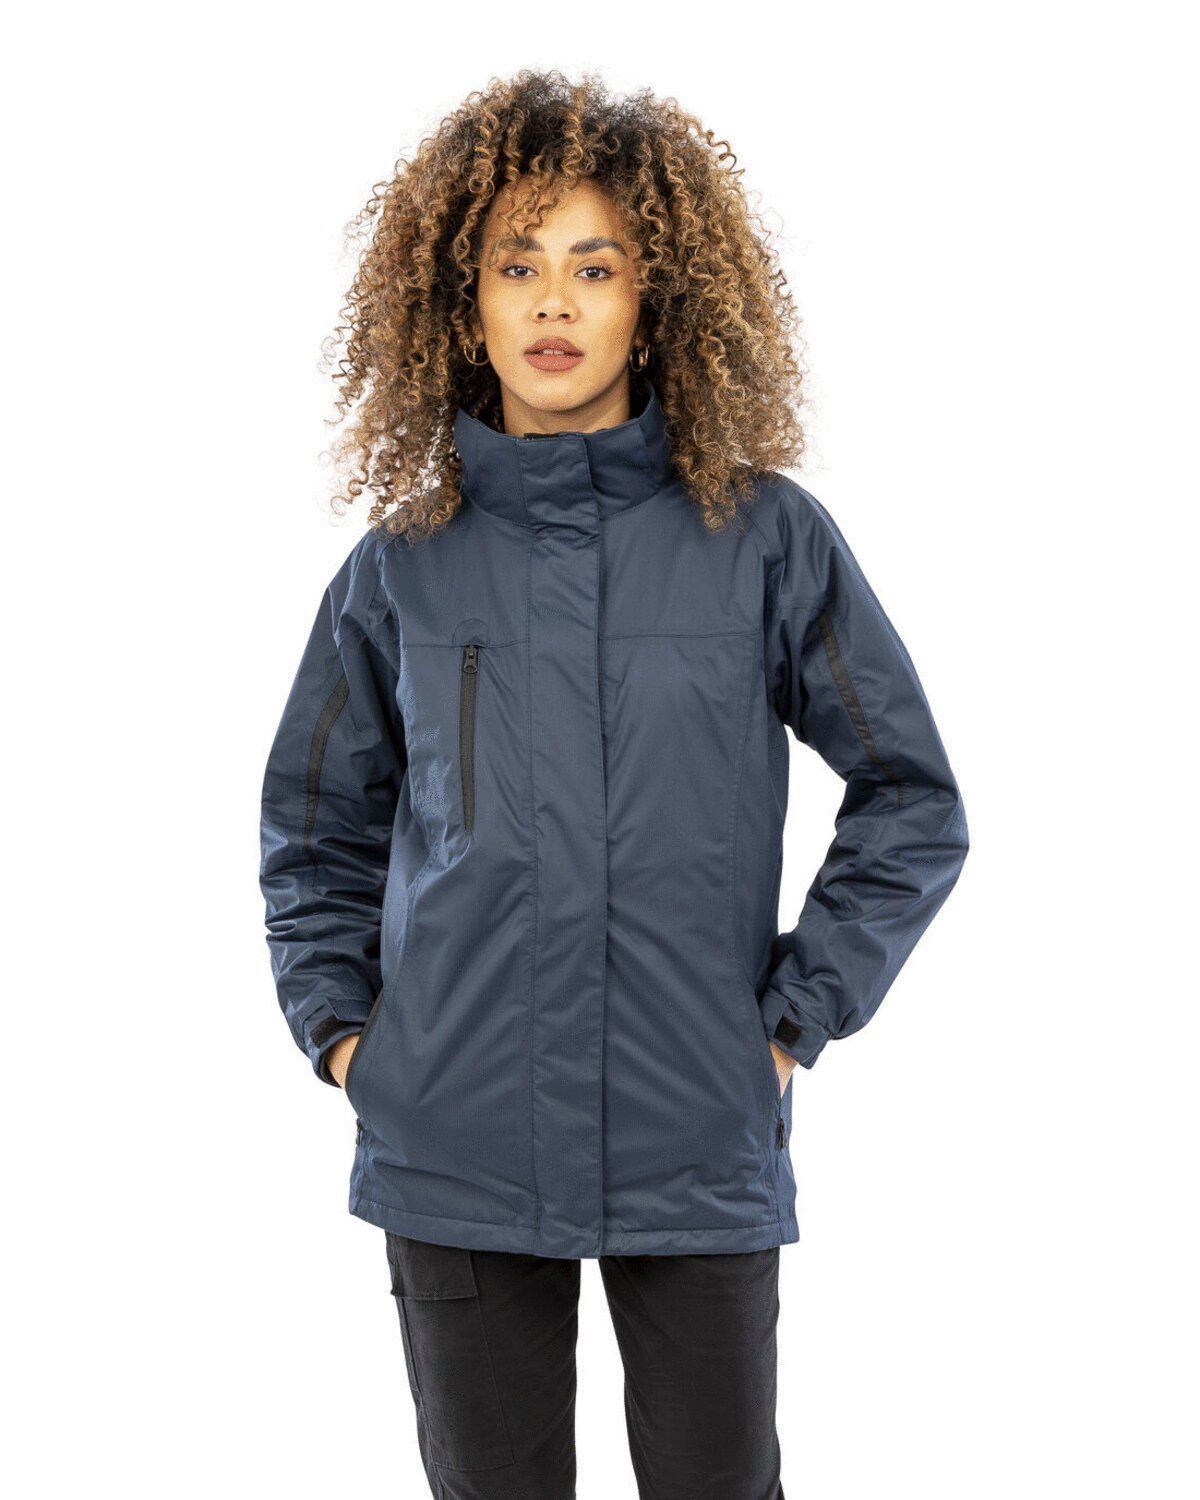 LADIES 3-IN-1 JOURNEY JACKET WITH SOFTSHELL INNER